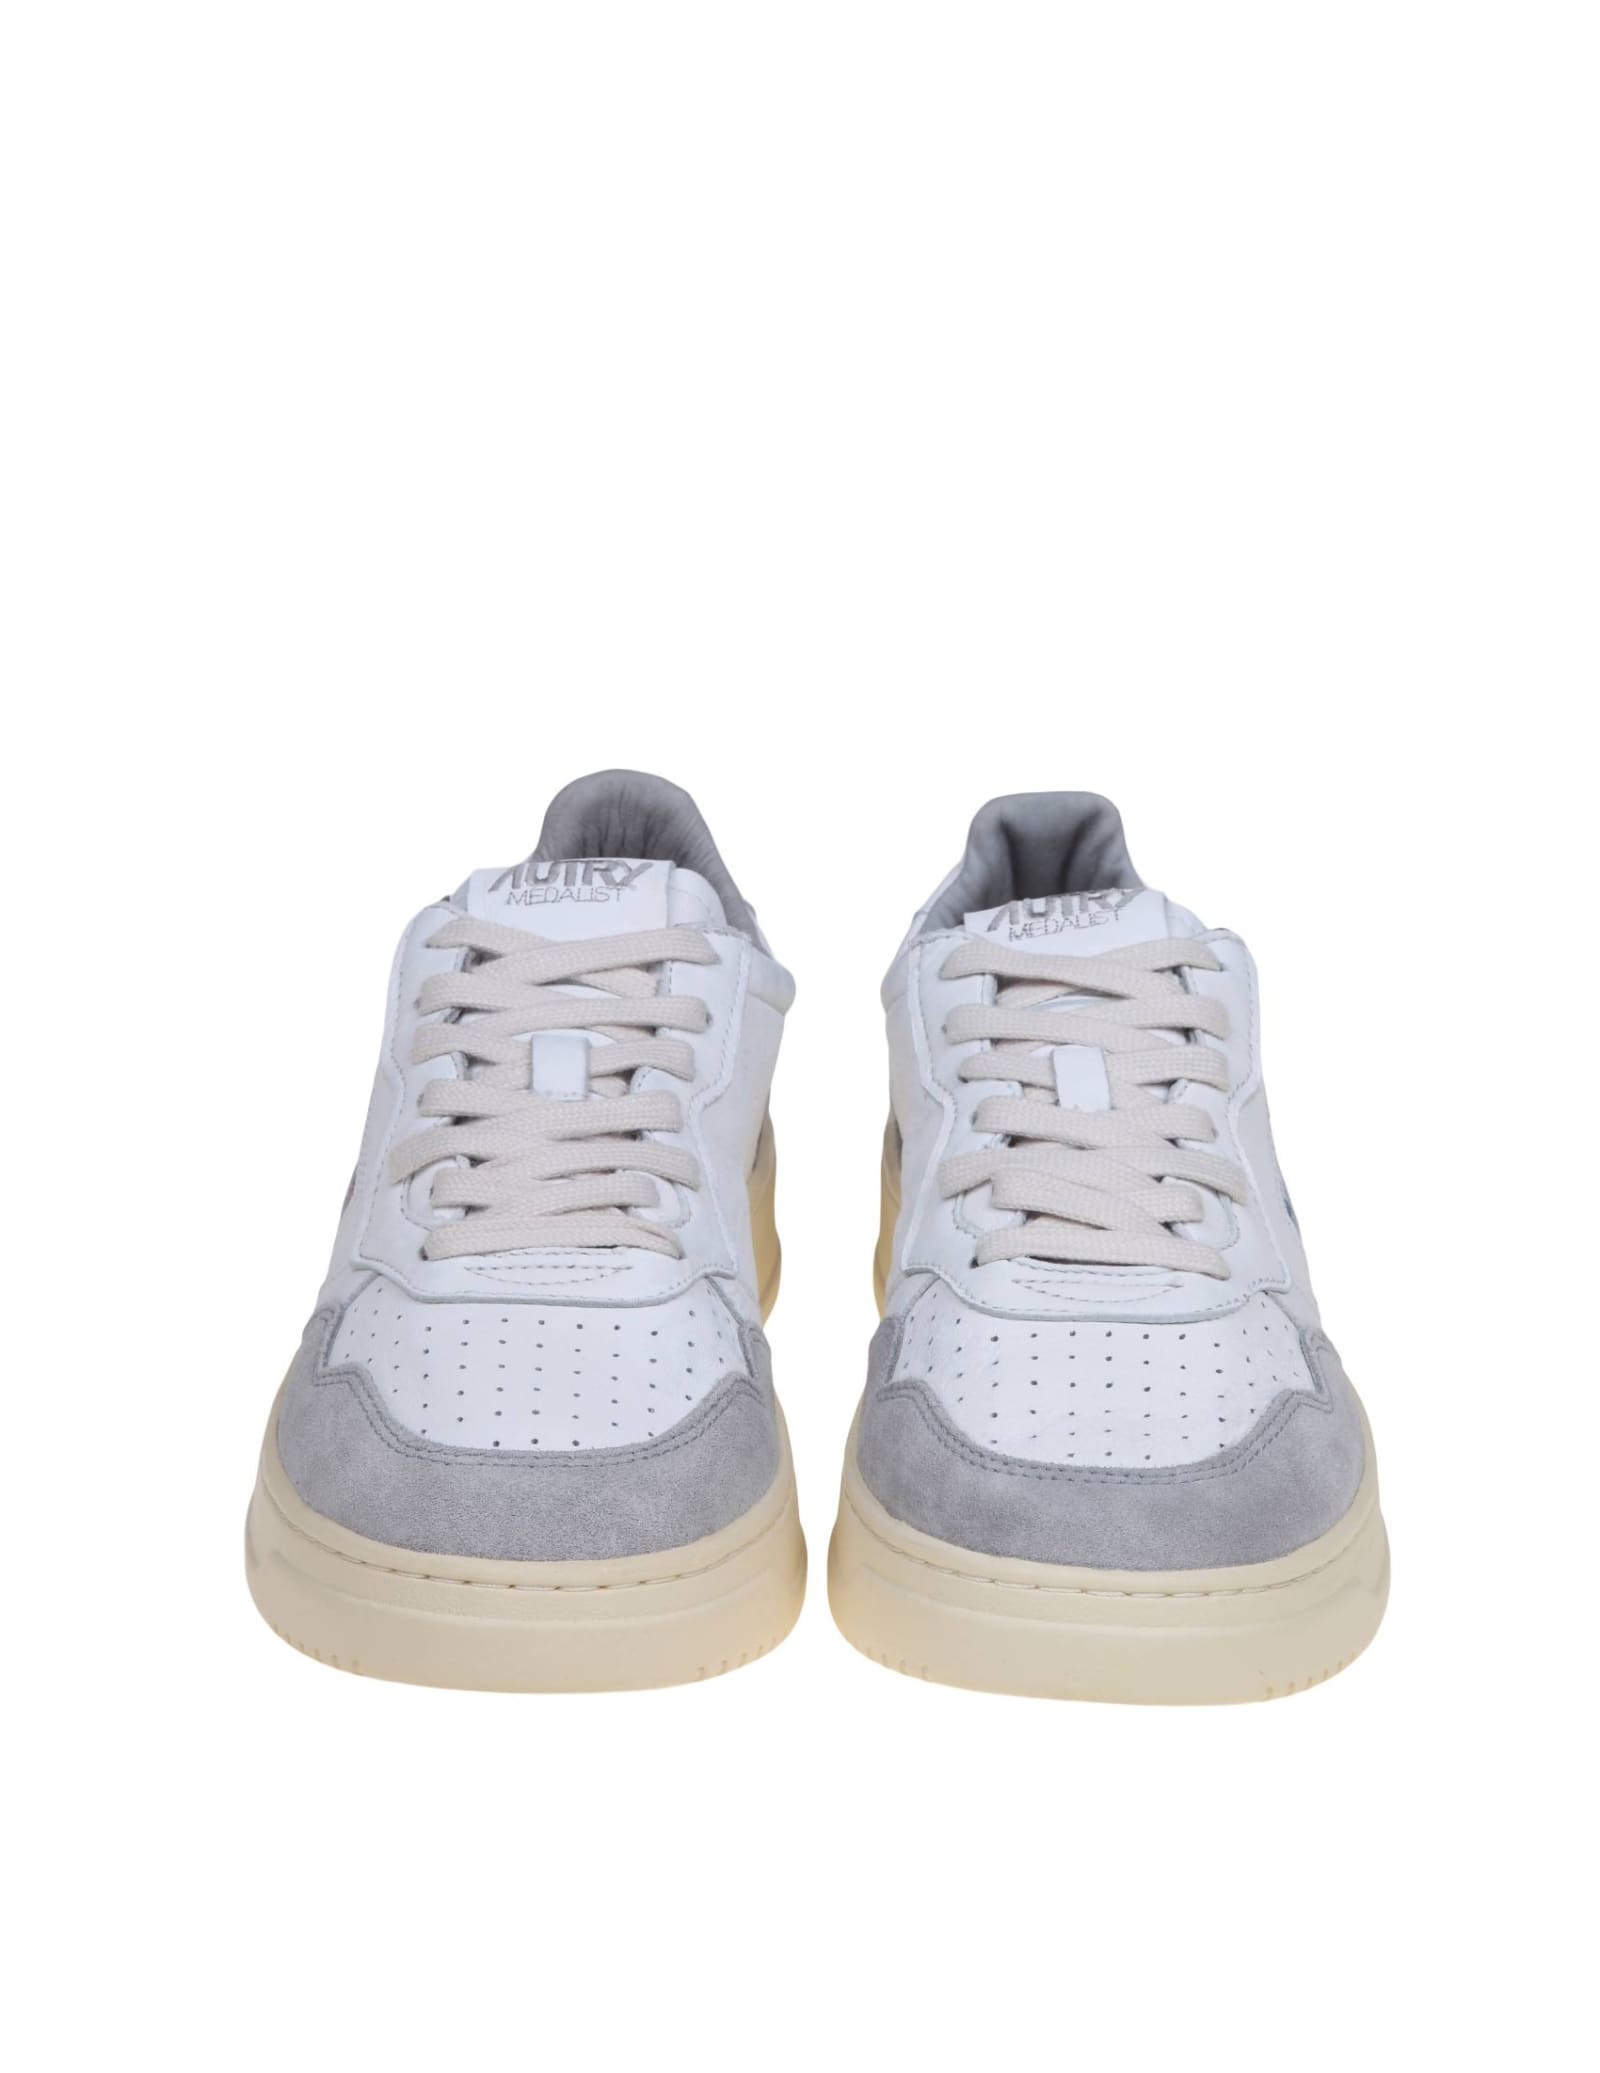 Shop Autry Sneakers In White And Gray Leather And Suede In Wht/grey